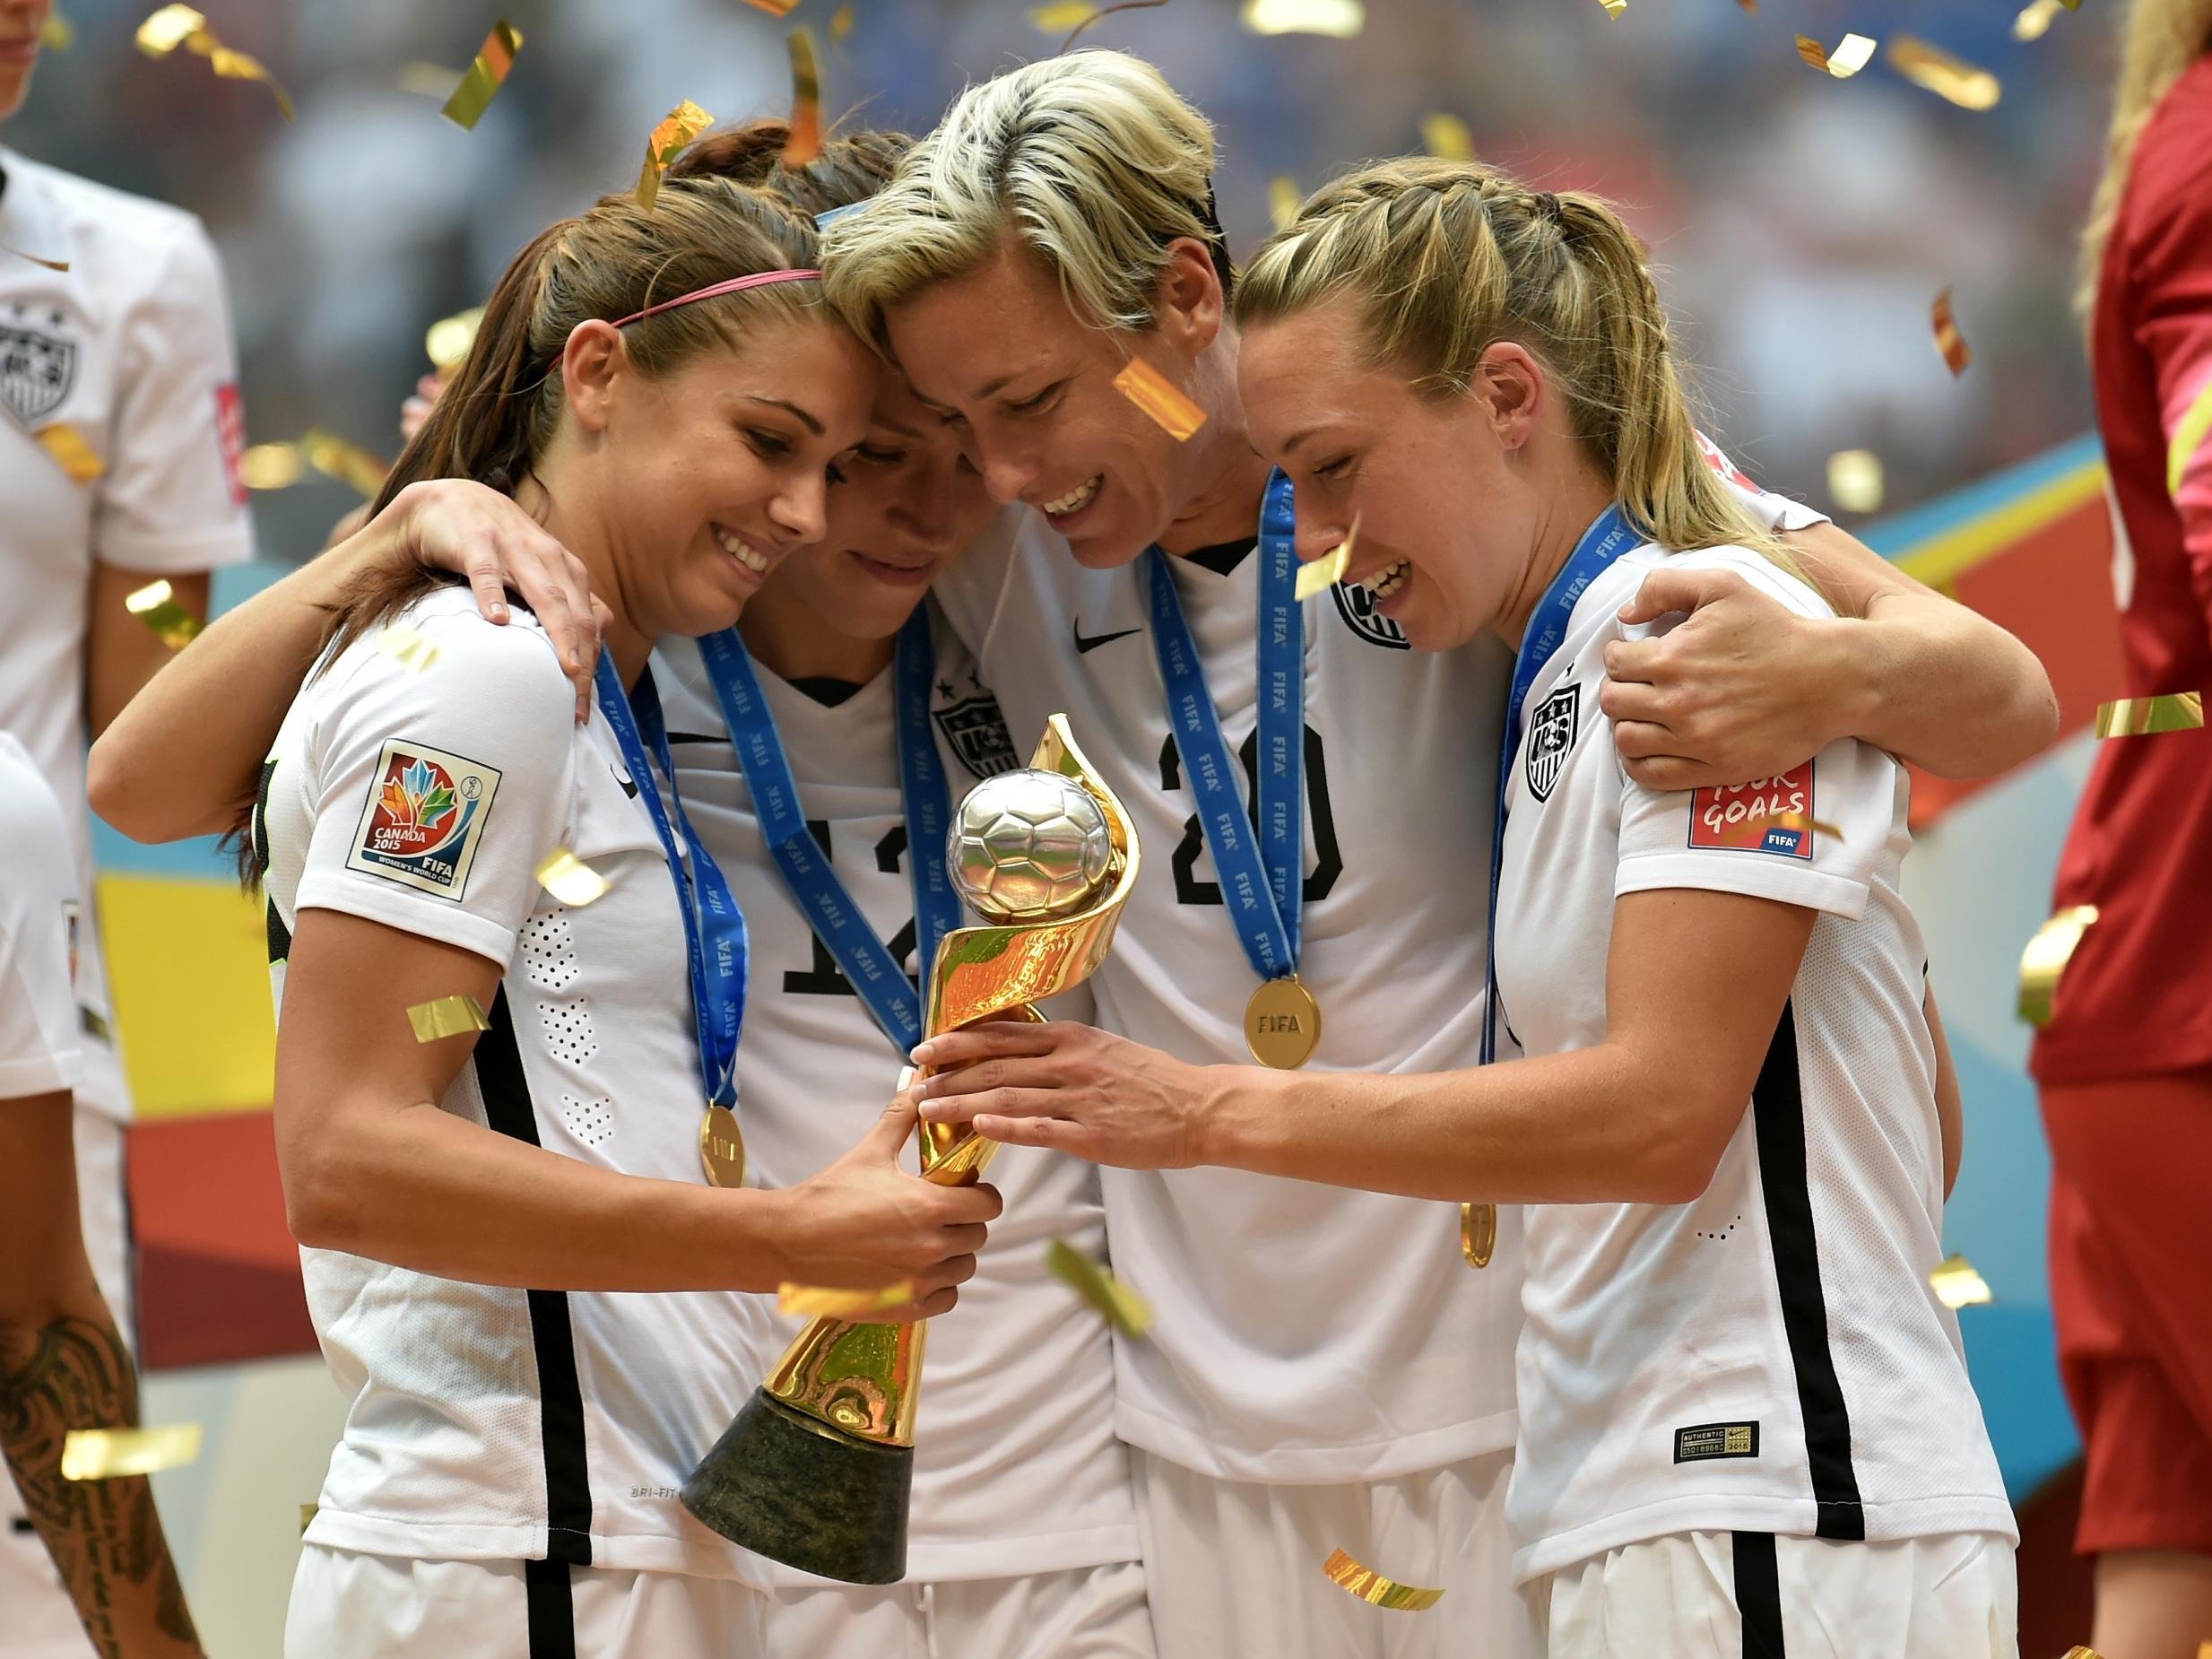 USA are the reigning Women’s World Champions